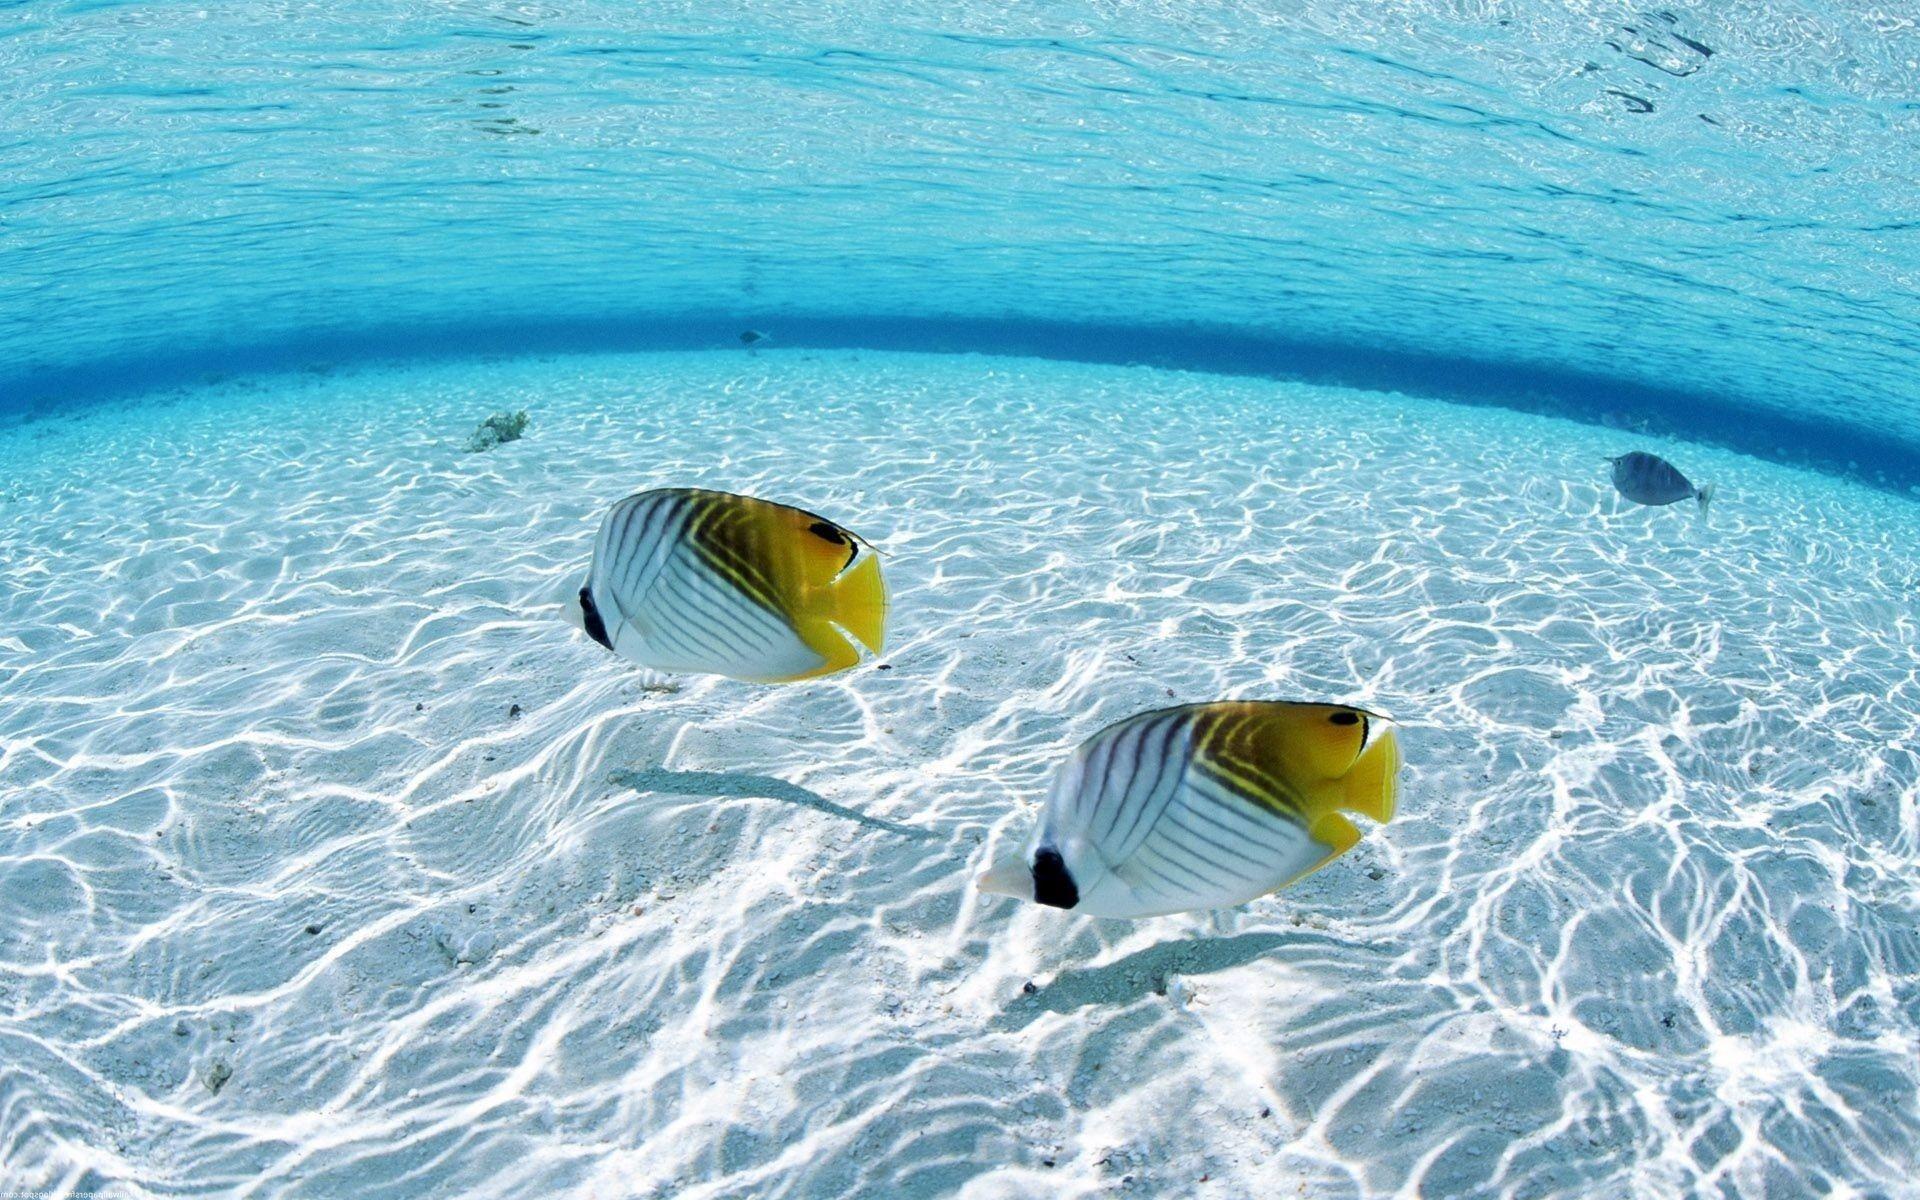 two fish wallpaper Search Engine